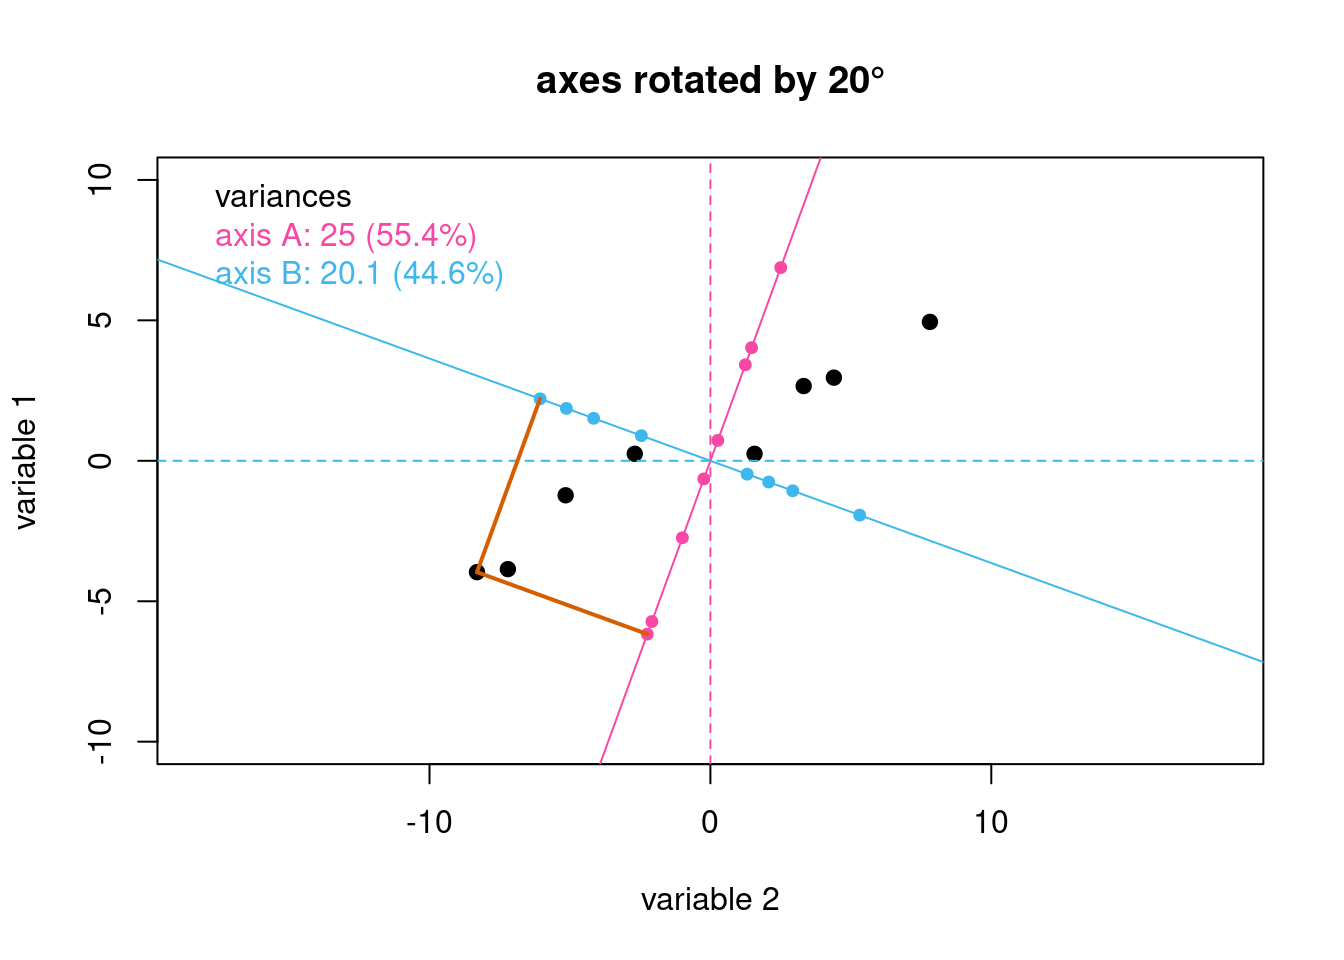 Rotating the original axes by 20$^\circ$ gives the axes shown as solid lines. The small points in pink and in blue are the projections of the original data onto the rotated axes. The gray lines serve as a guide to illustrate the projections for one data point.